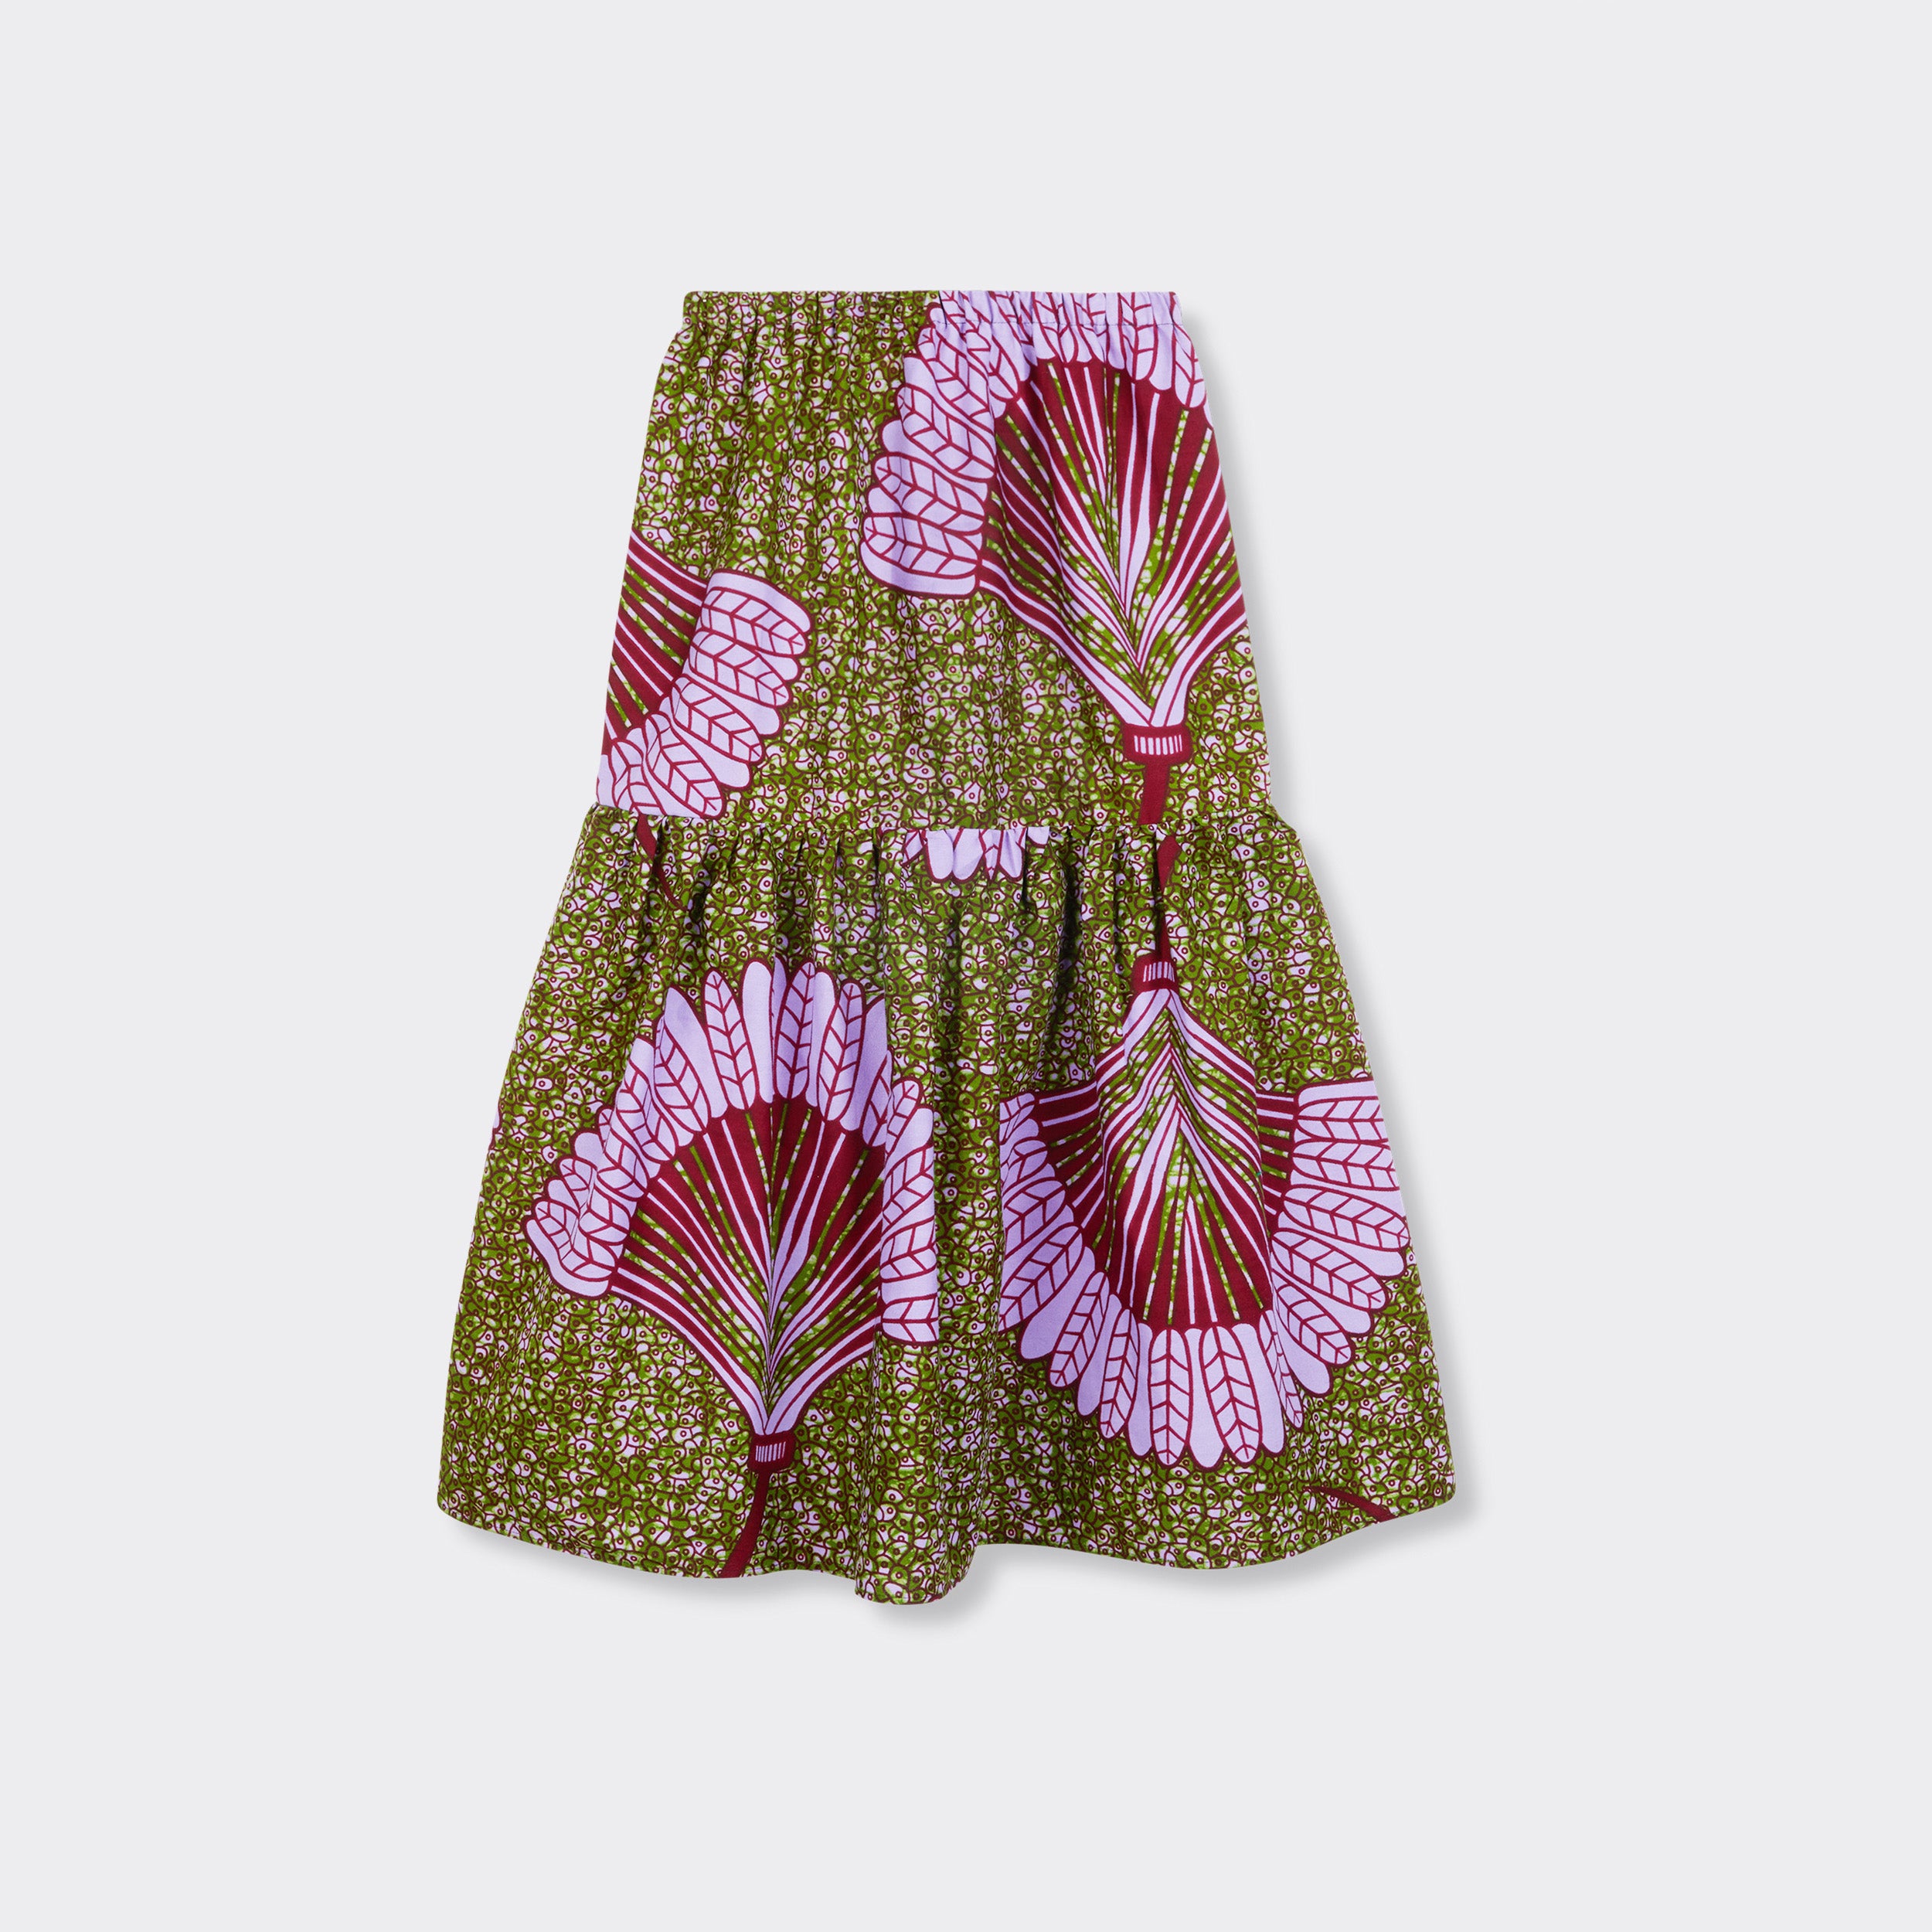 Still life: Flounced Maxi Skirt Baby in Wax Purple Feathers with colors purple and green.